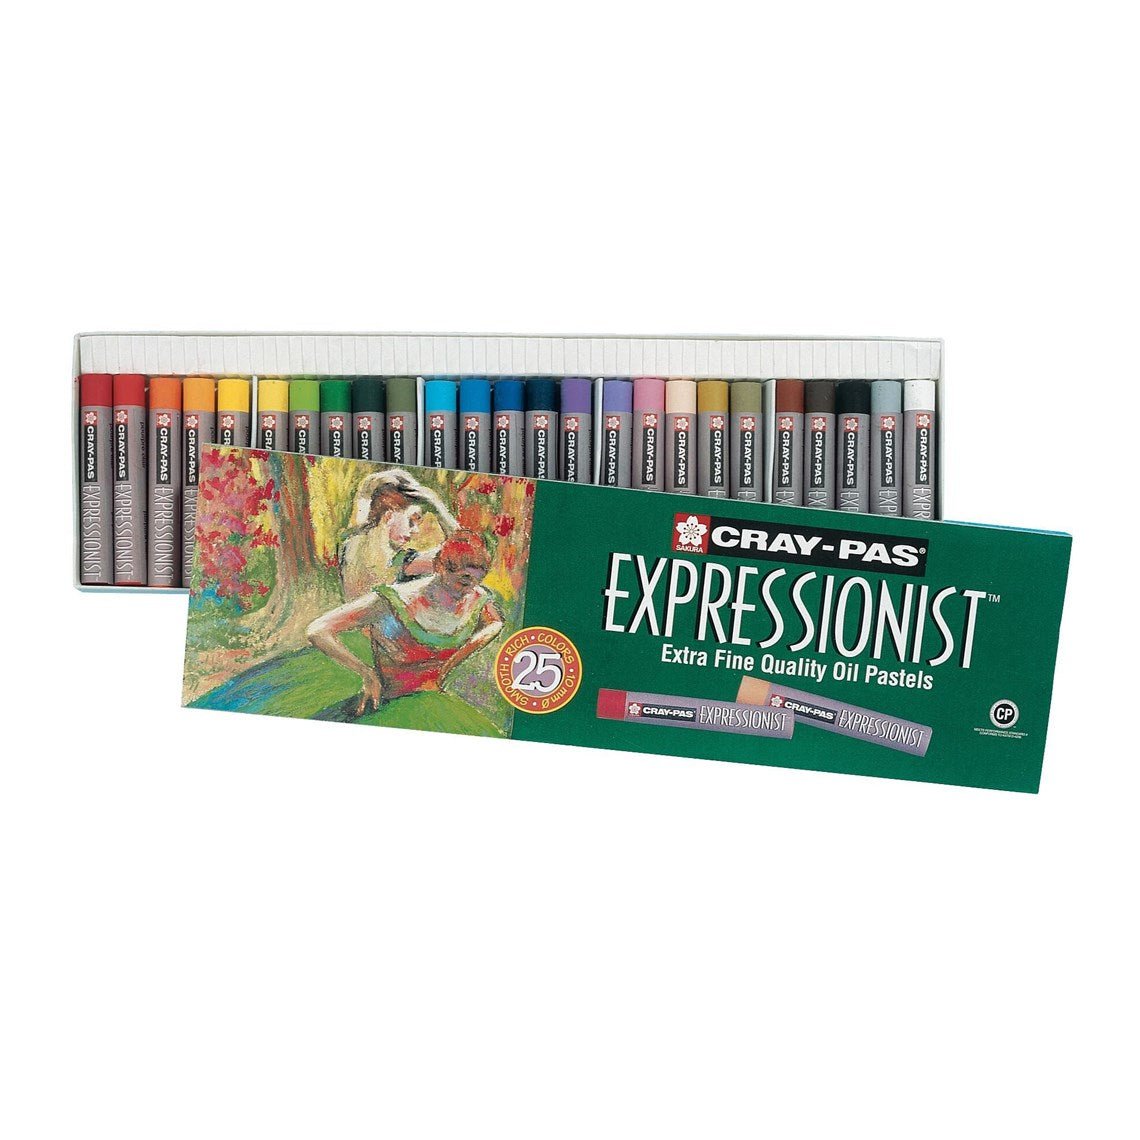 Cray-Pas Expressionist Oil Pastel Set of 12